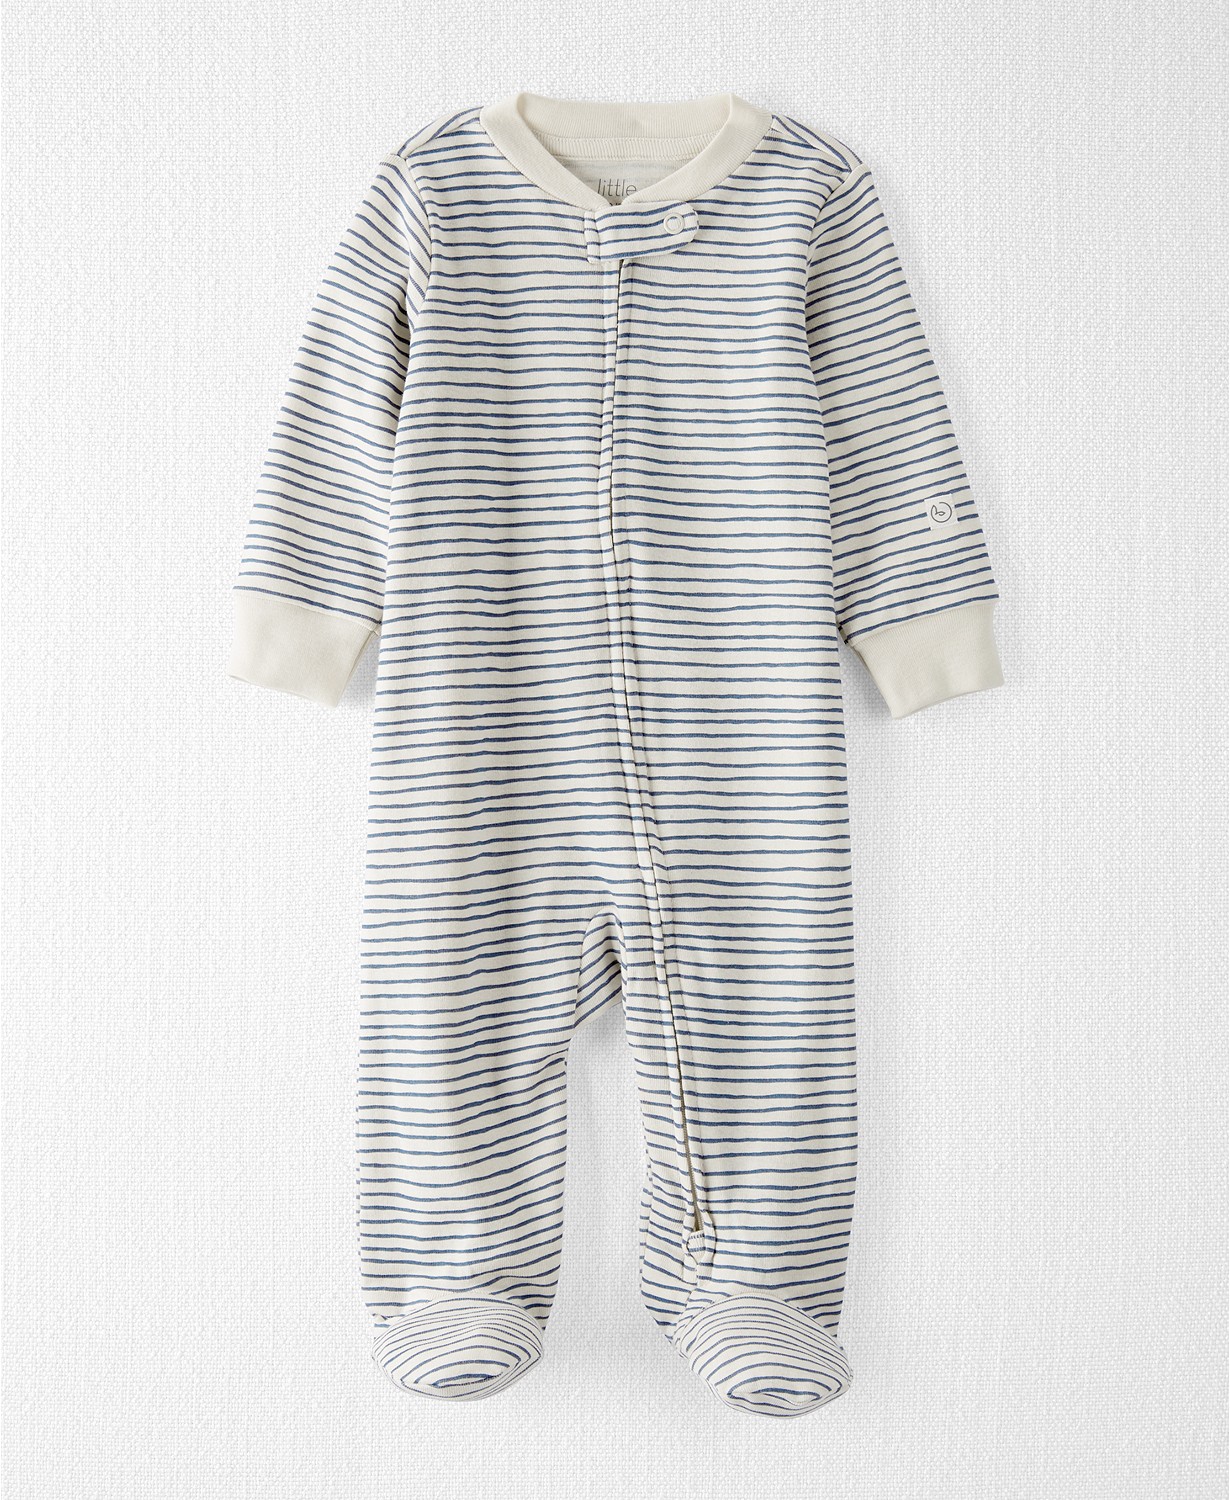 Baby Boys and Baby Girls Organic Cotton Sleep and Play Coveralls